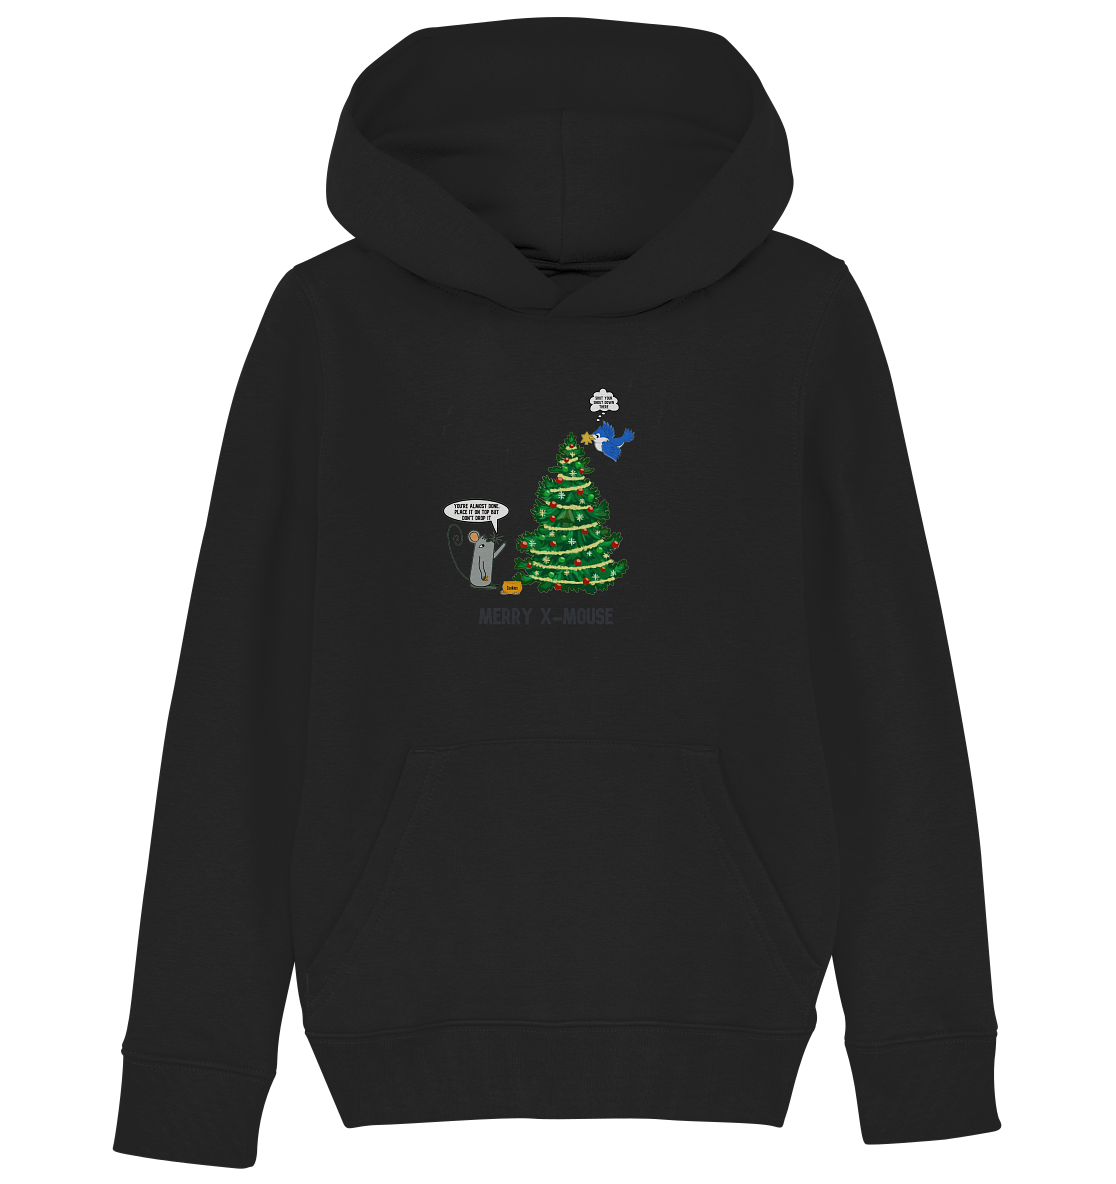 Cheesy -The Mouse® Merry X-Mouse - Kids Organic Hoodie